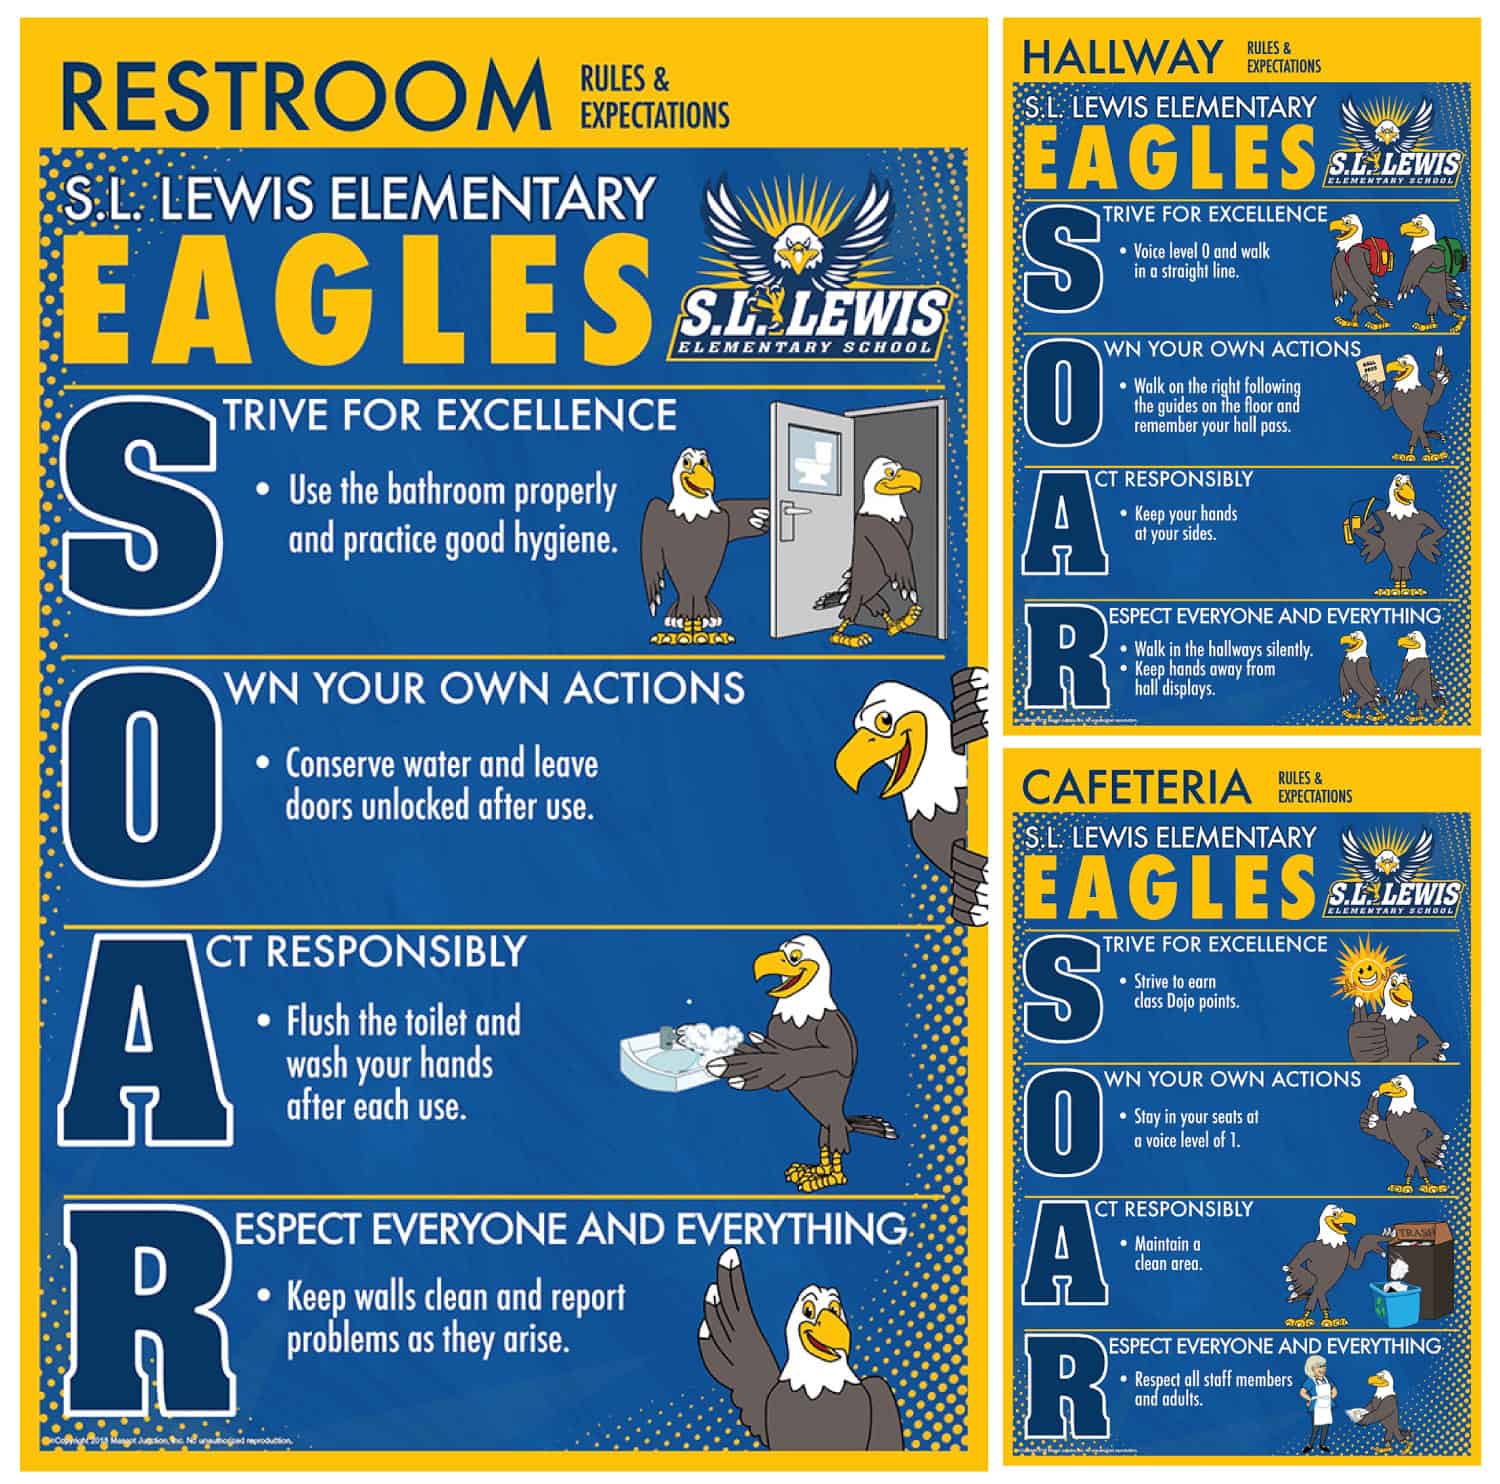 Rules-posters_Eagle2